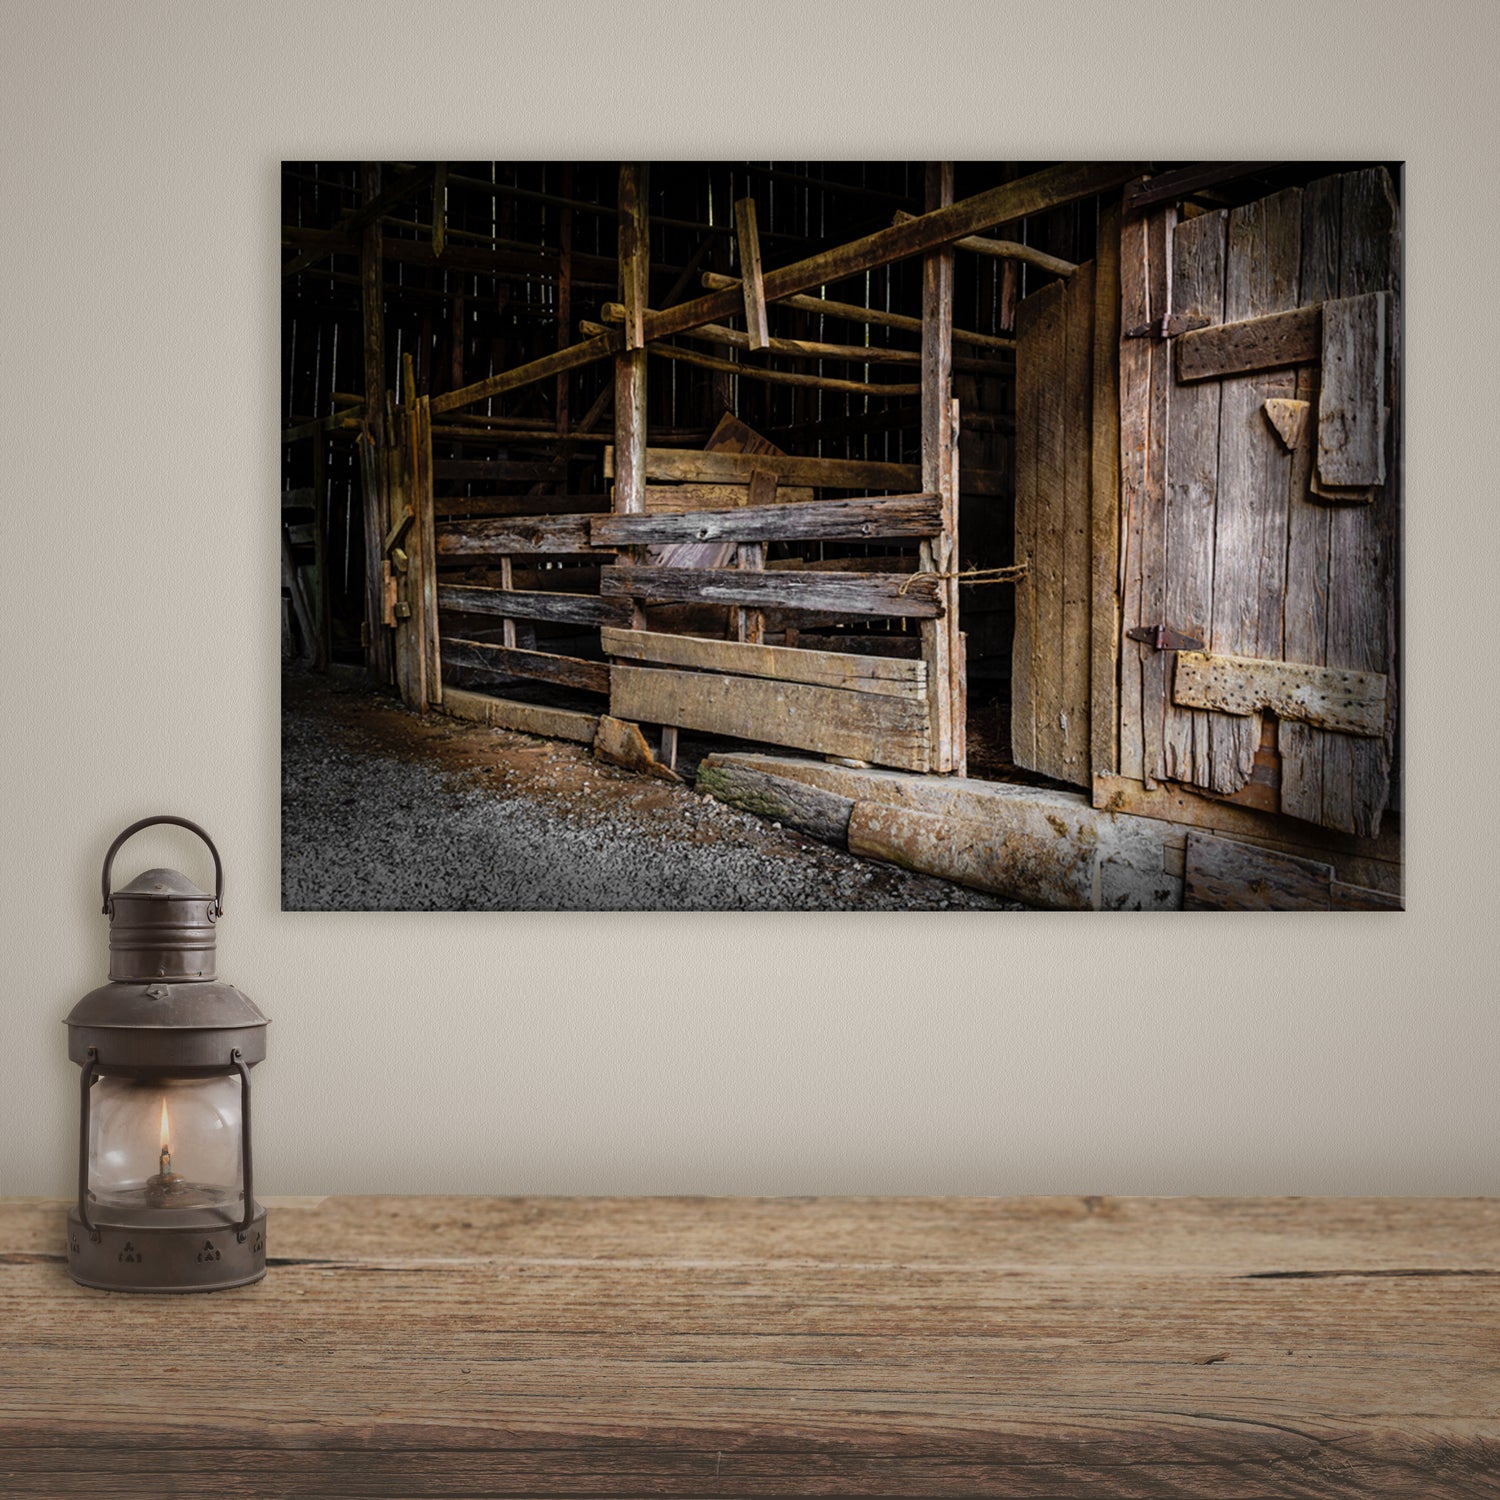 Wall art canvas featuring the interior of an abandoned barn